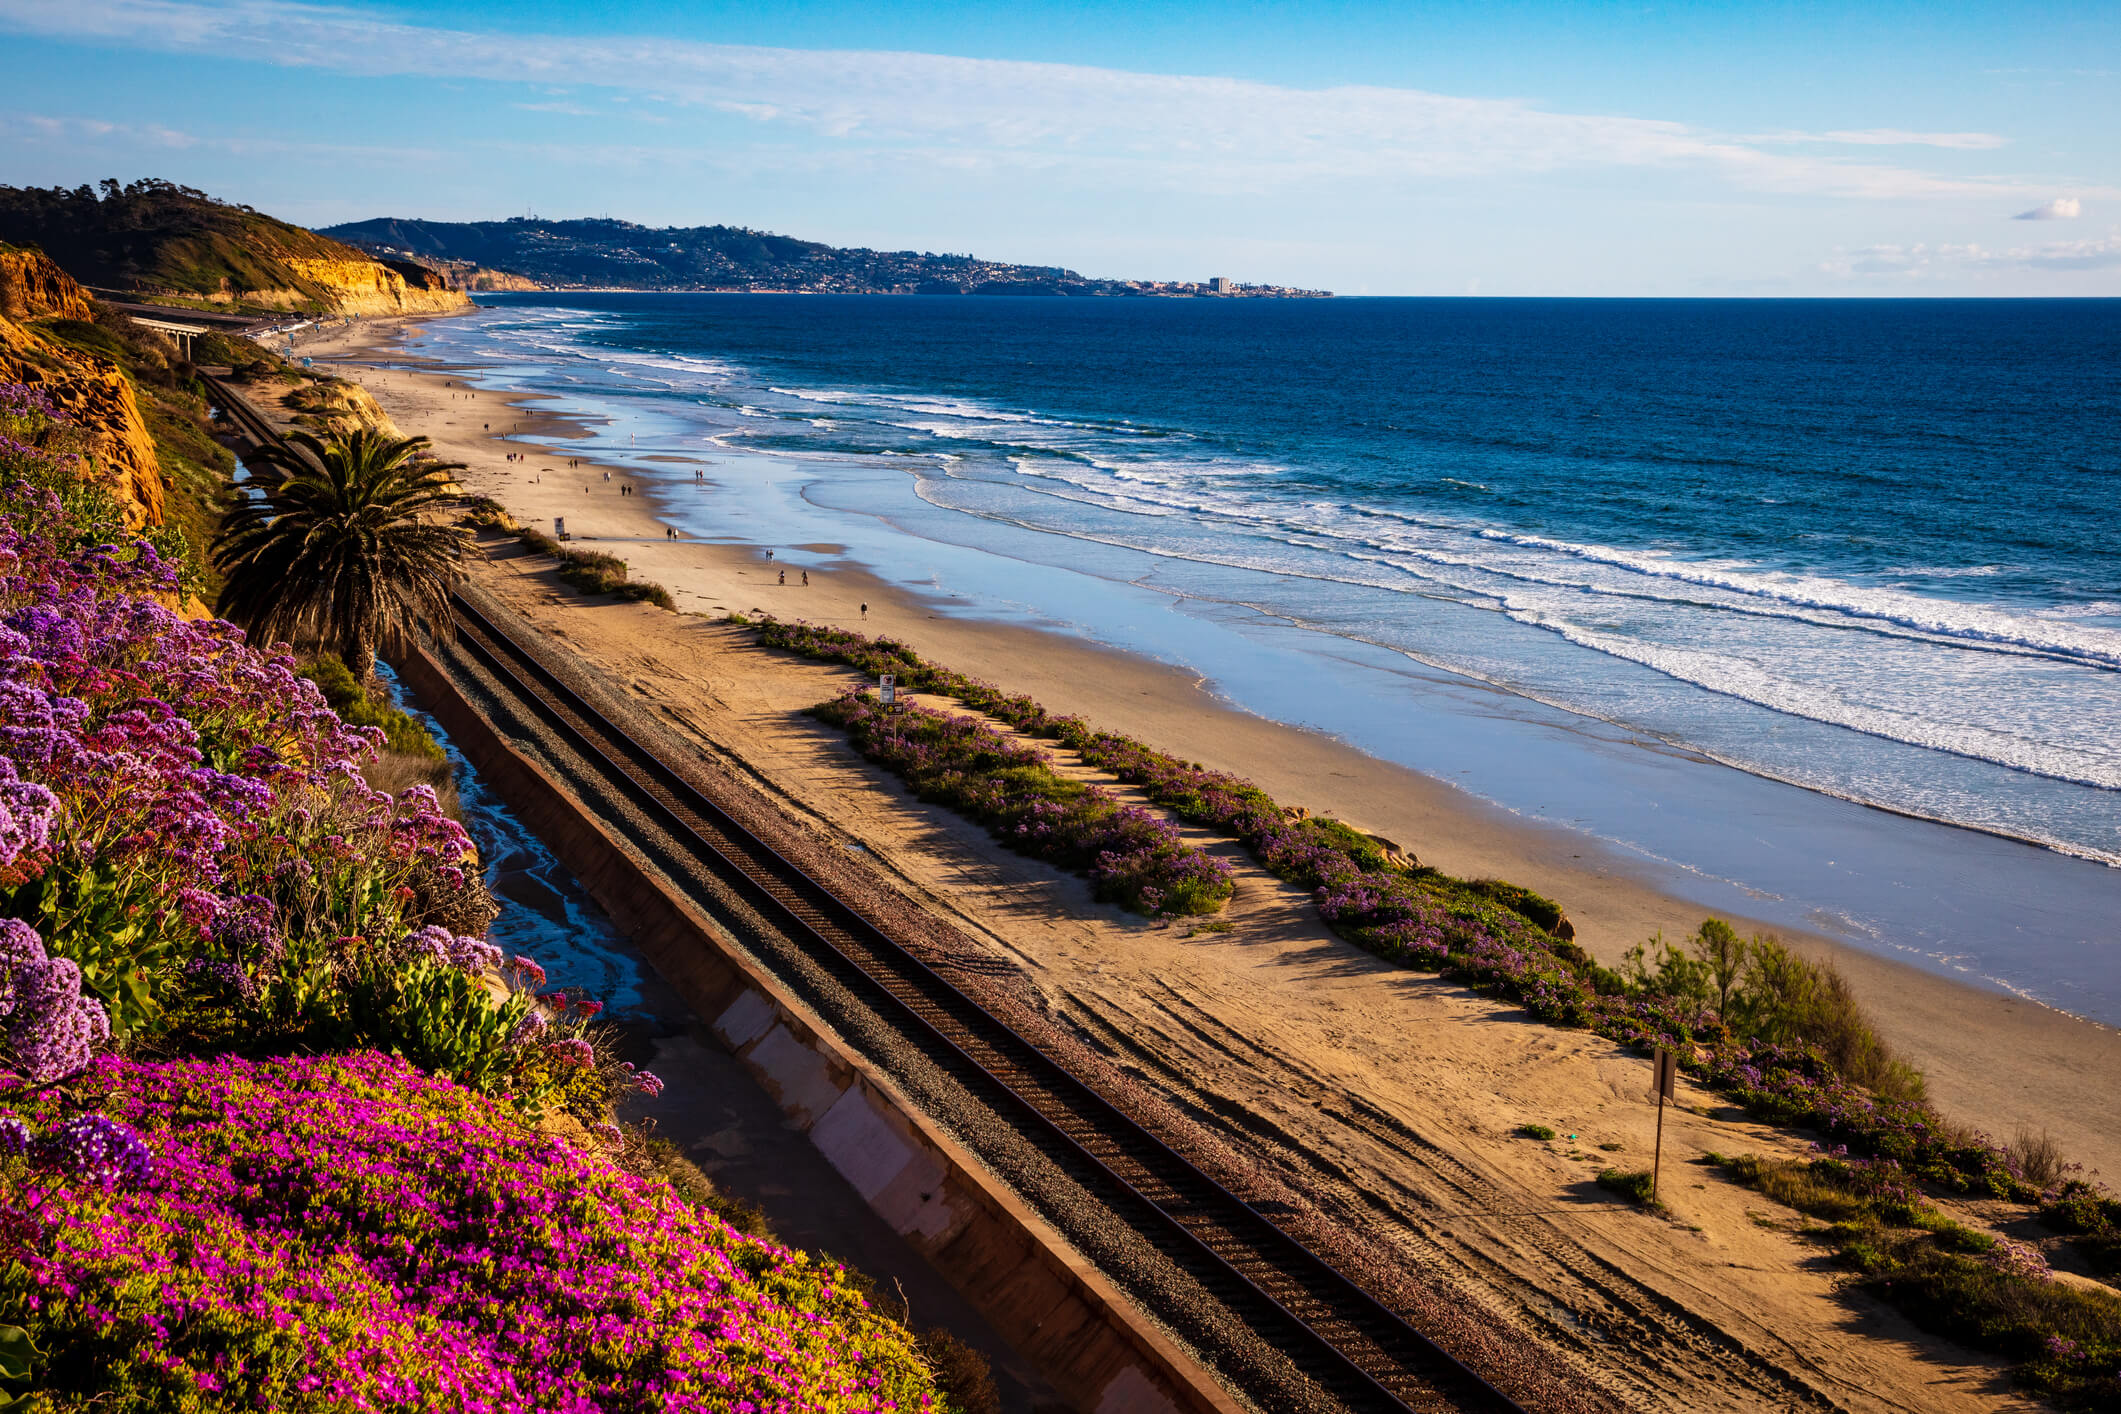 North County is one of the best neighborhoods to live in San Diego